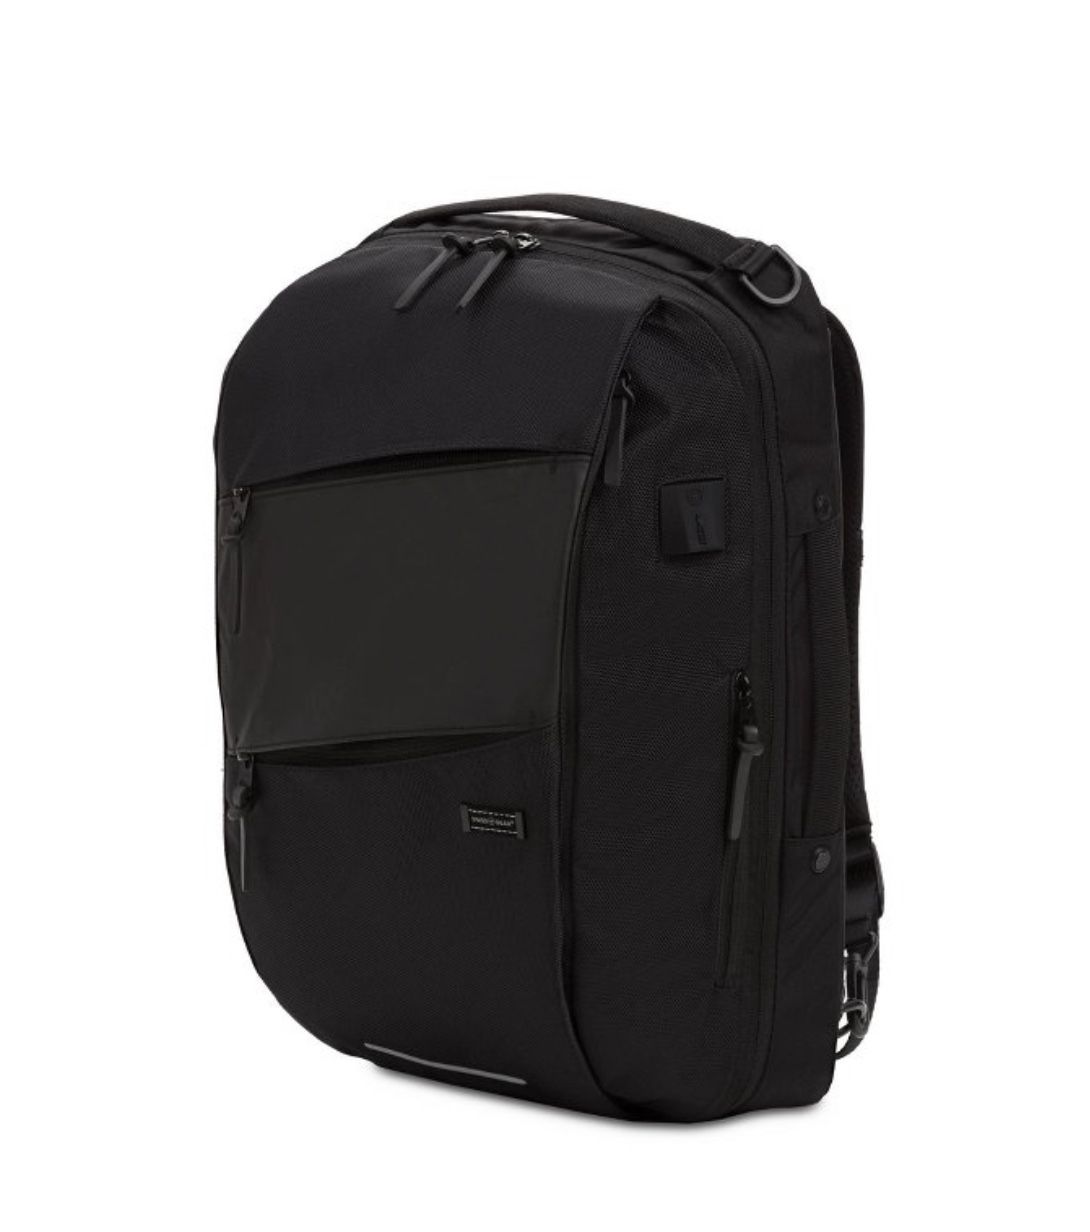 SWISSGEAR 19" Hybrid Backpack/Messenger - Black  This clever Swissgear 2872 Travel Laptop Bag has its forte in versatility. with a three-in-one design